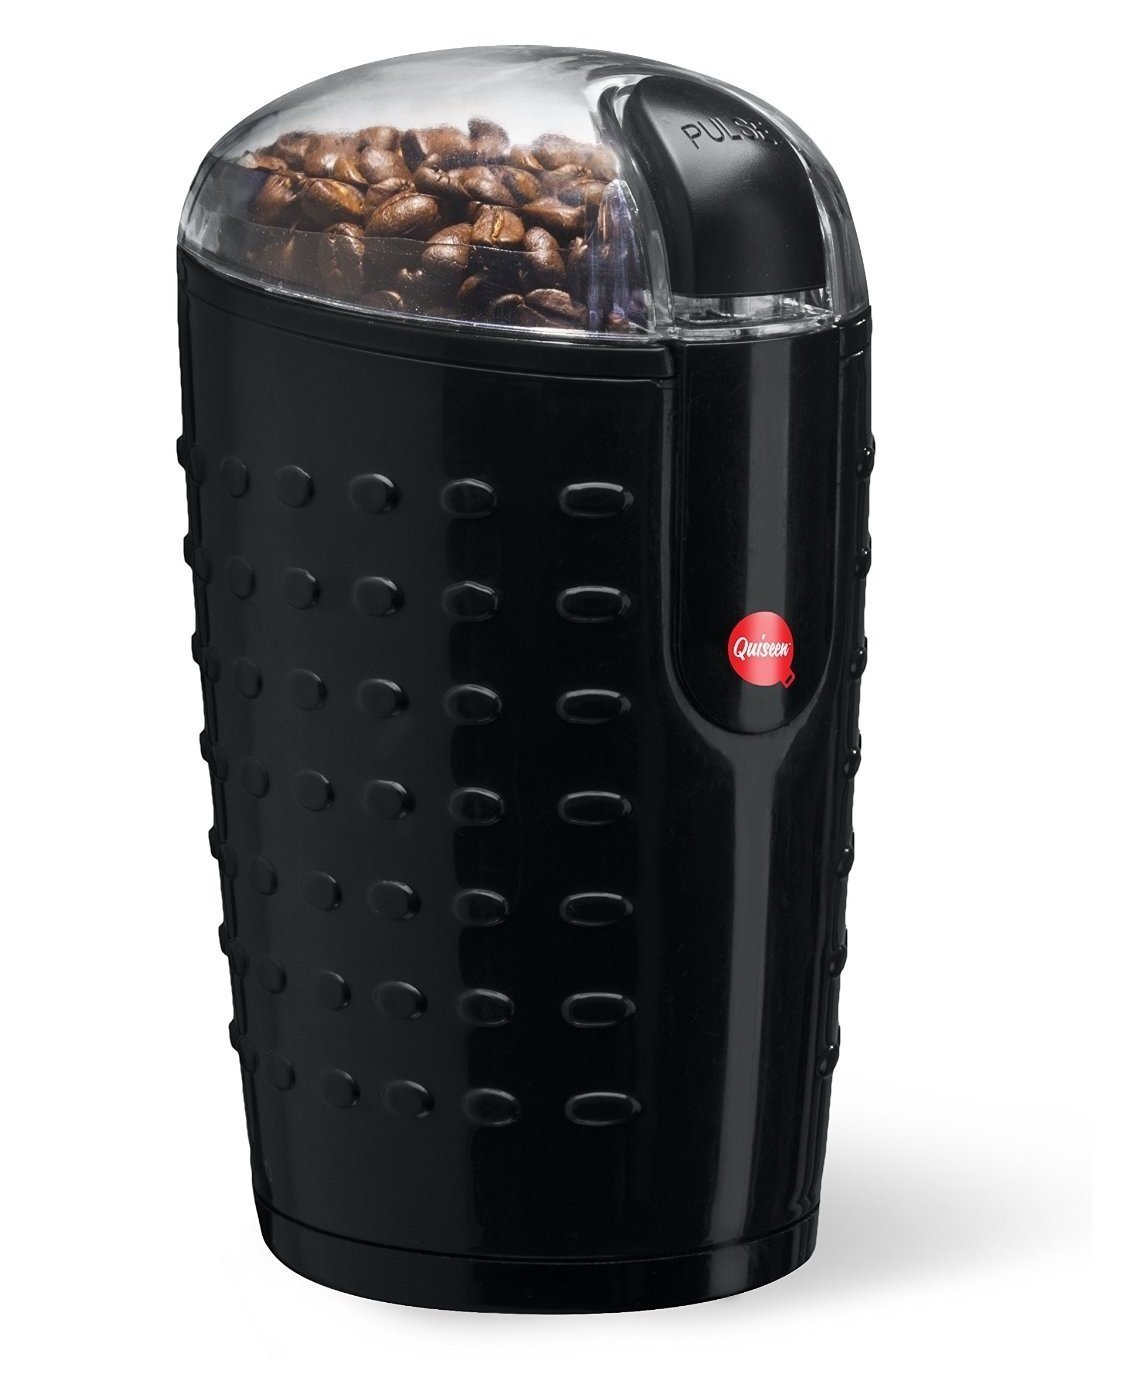 Quiseen One-Touch Electric Coffee Grinder